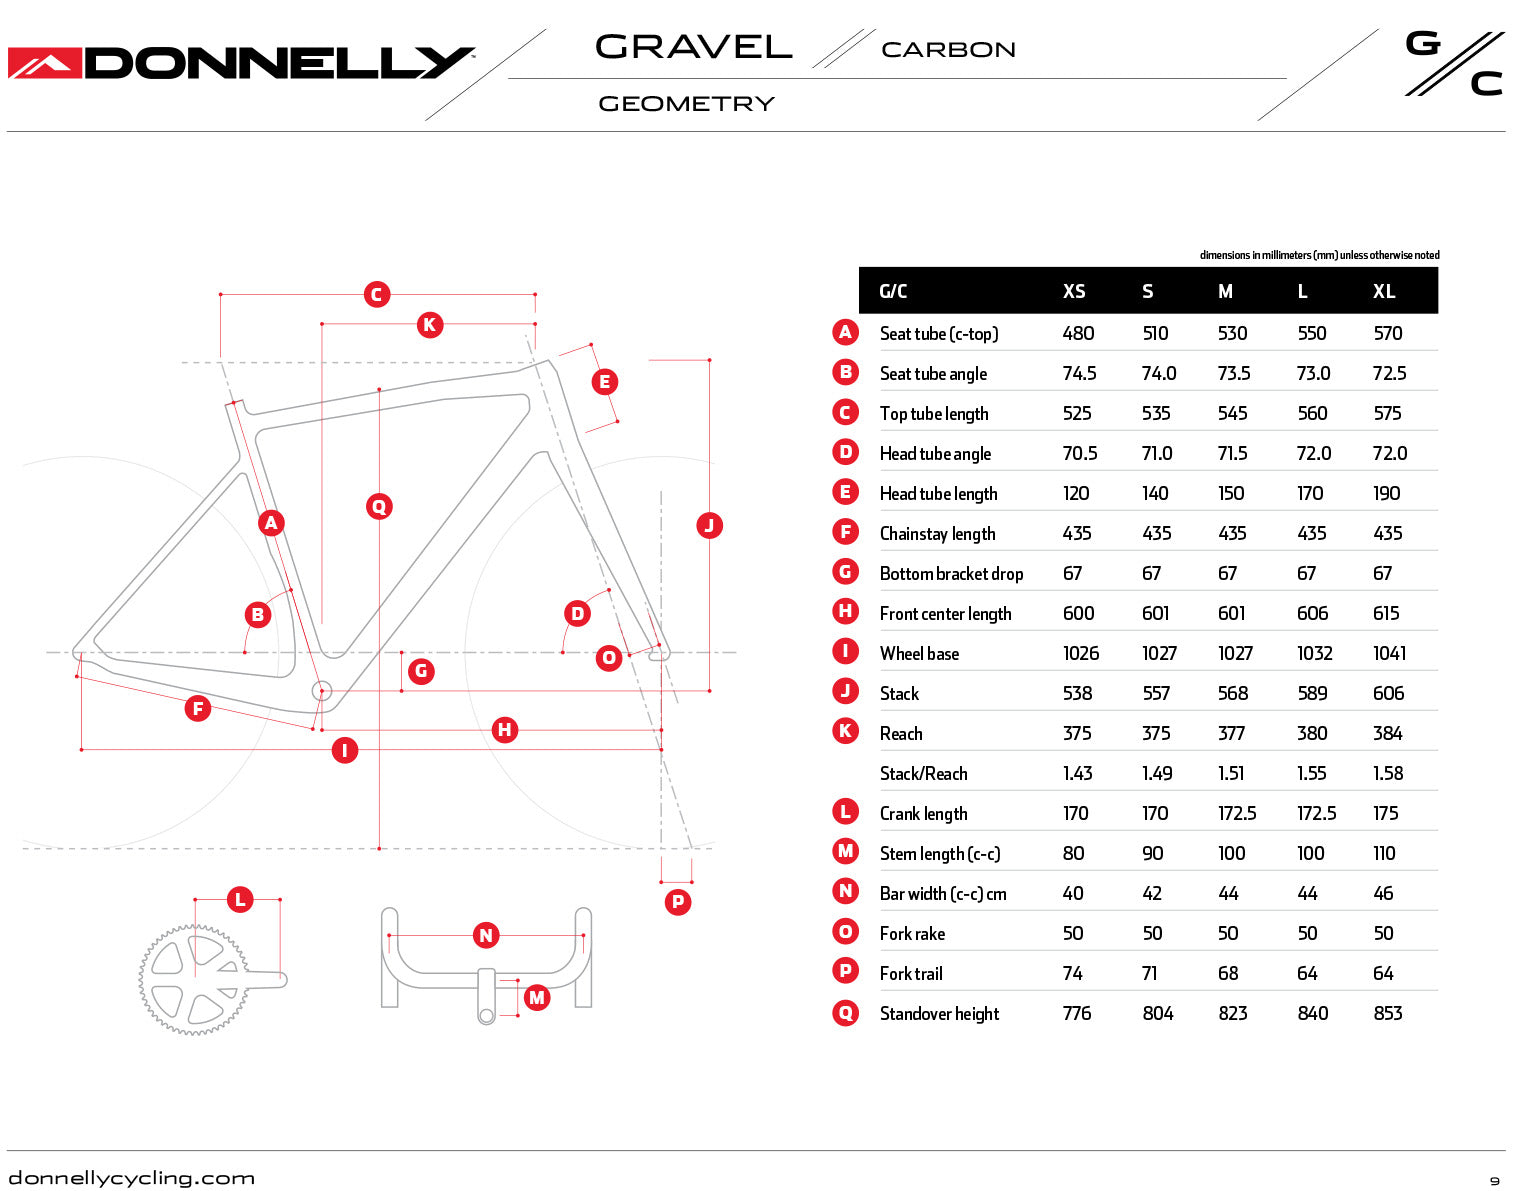 Donnelly G//C Gravel Carbon bike geometry chart